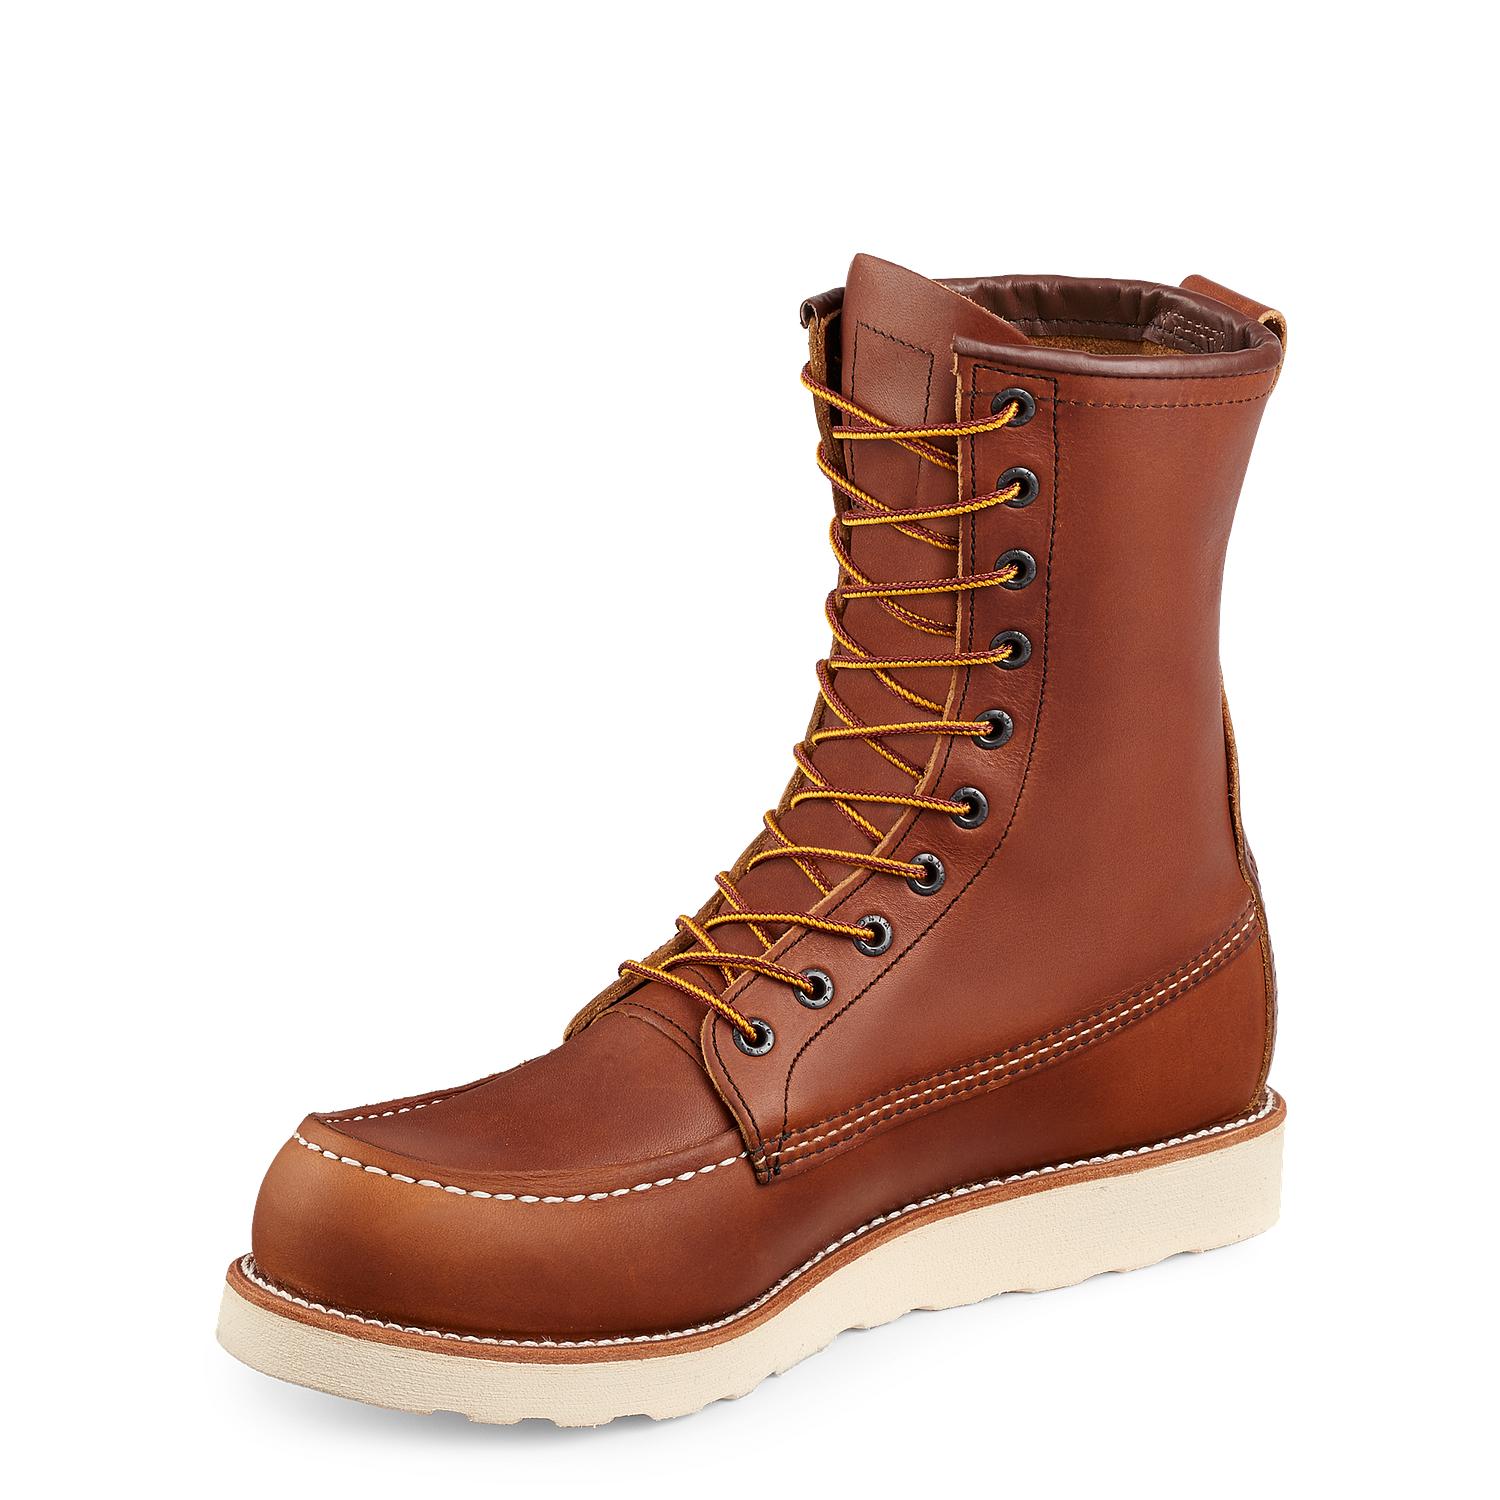 Men's 10877 Traction Tred 8-inch Boot | Red Wing Work Boots